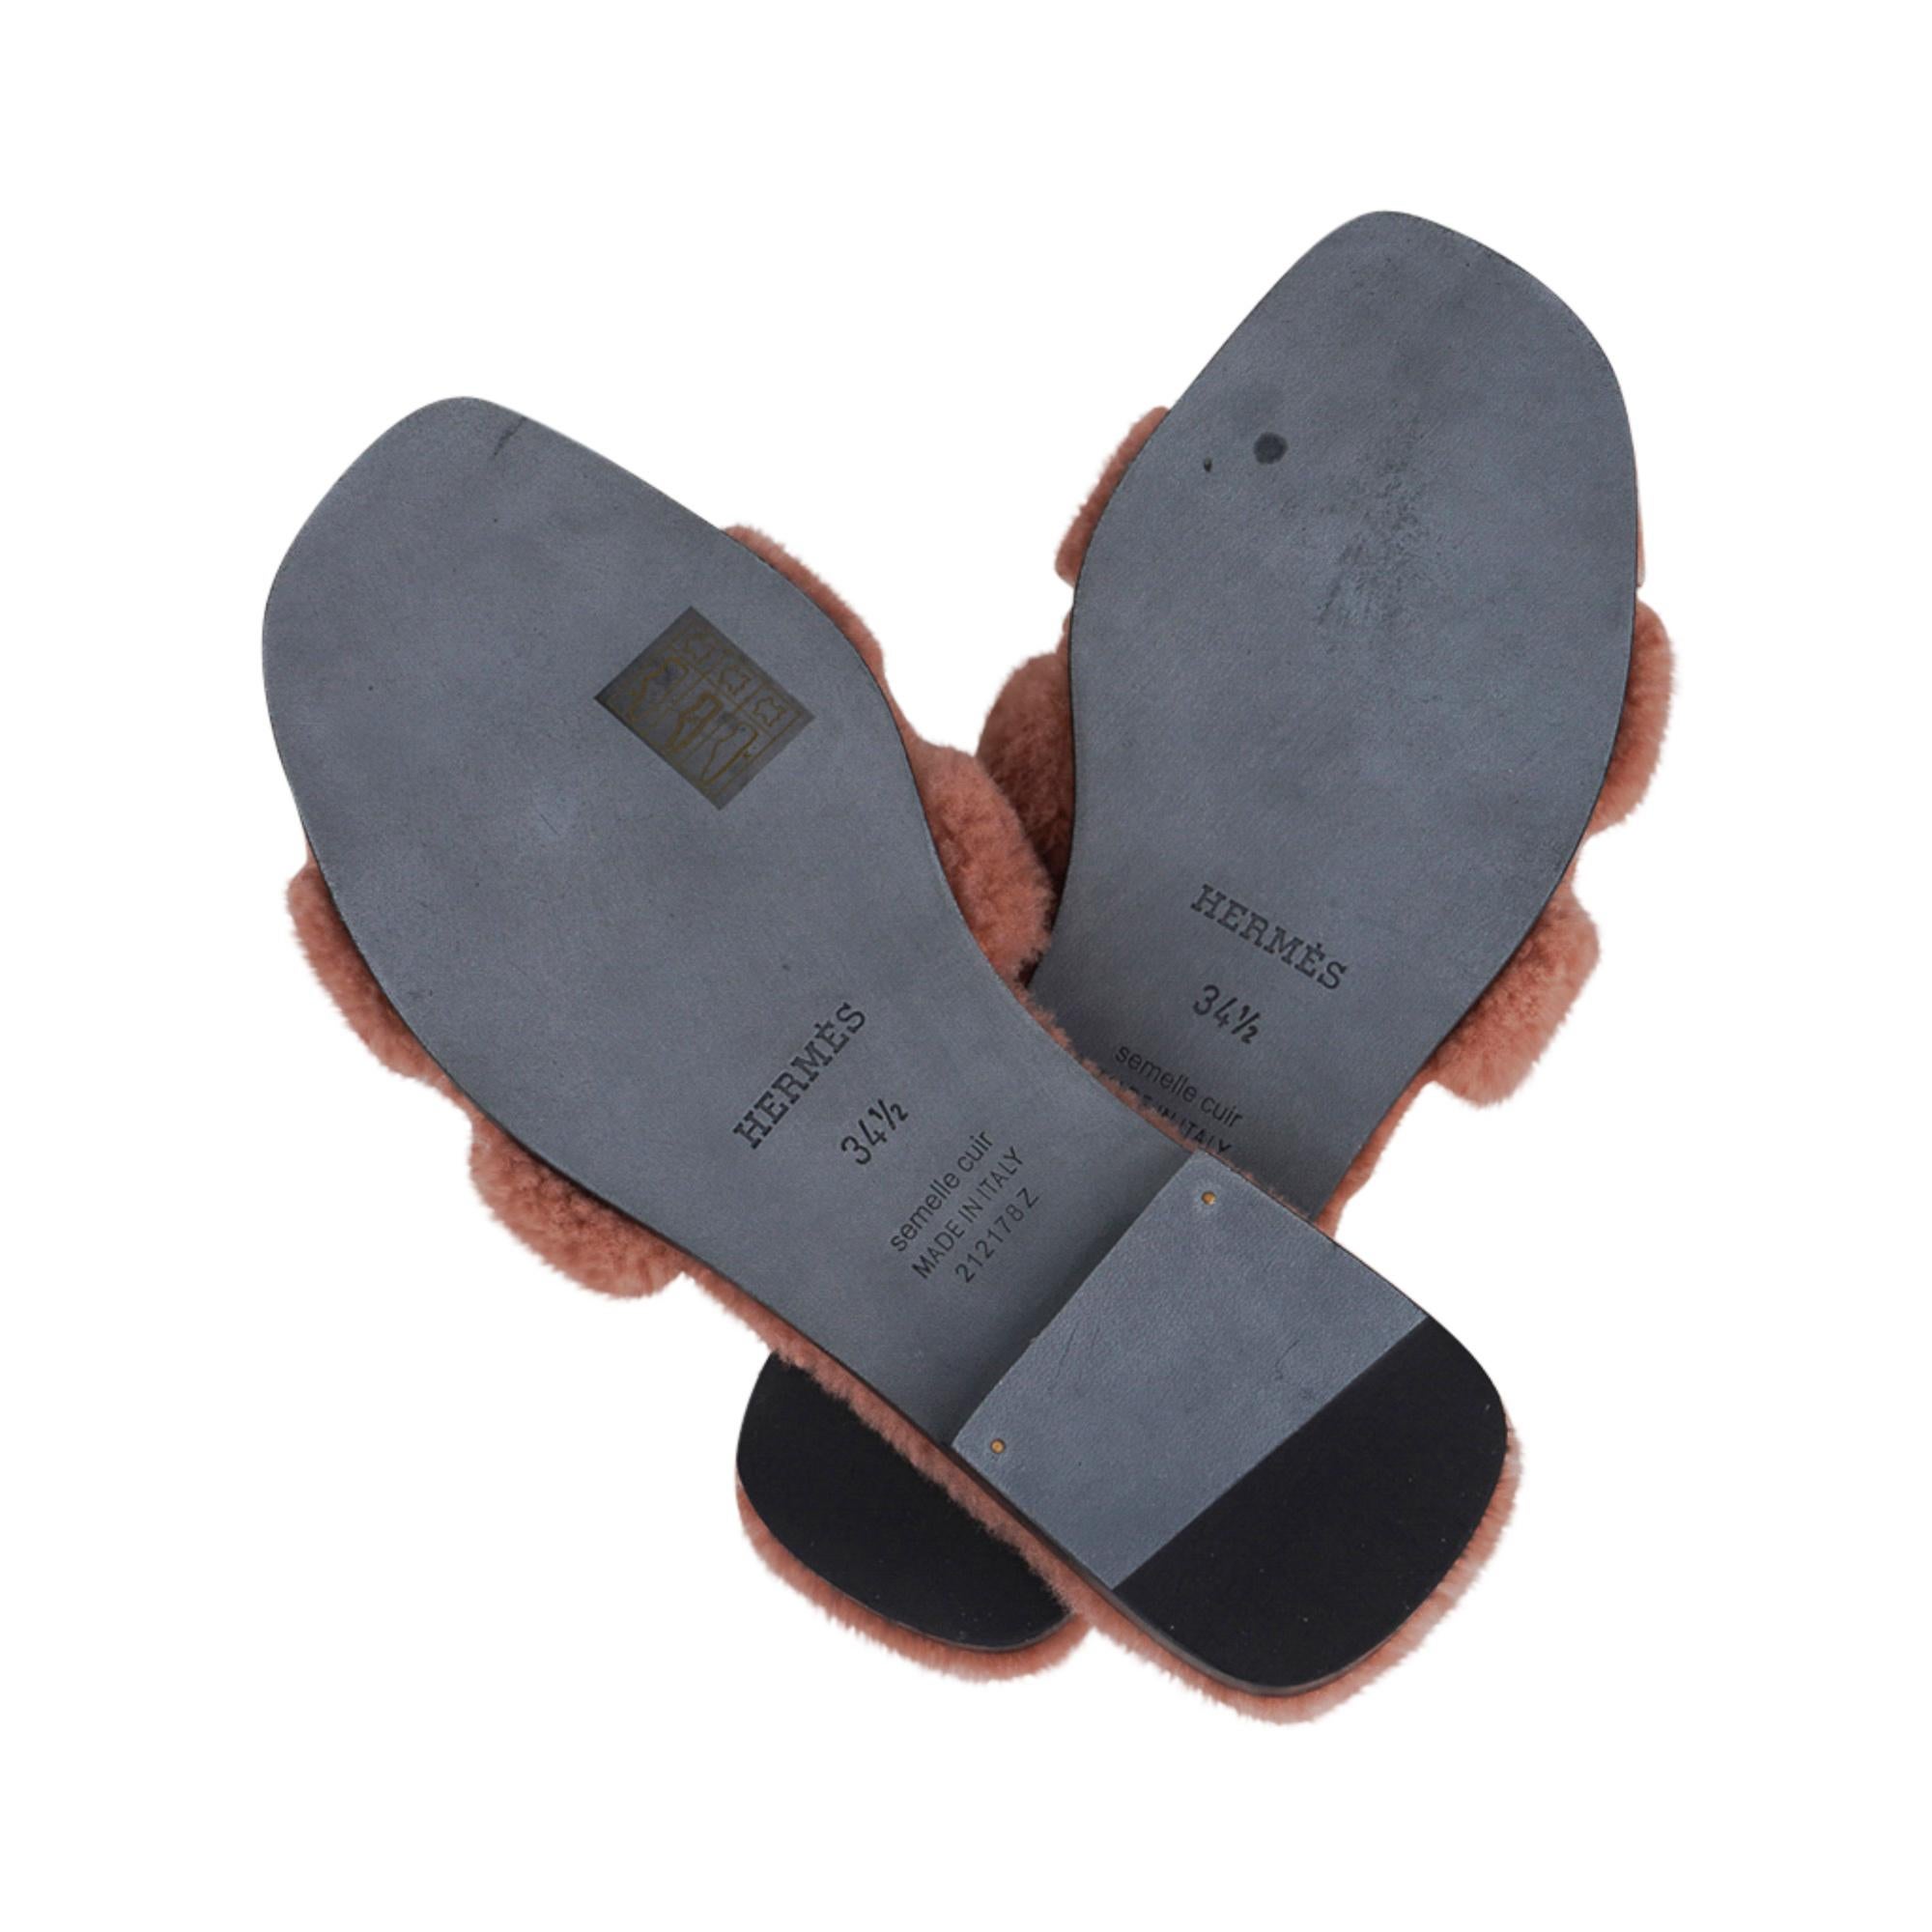 Hermes Teddy Bear Oran Rose Aube Shearling Sandal Limited Edition 34.5 / 4.5 5 In New Condition For Sale In Miami, FL